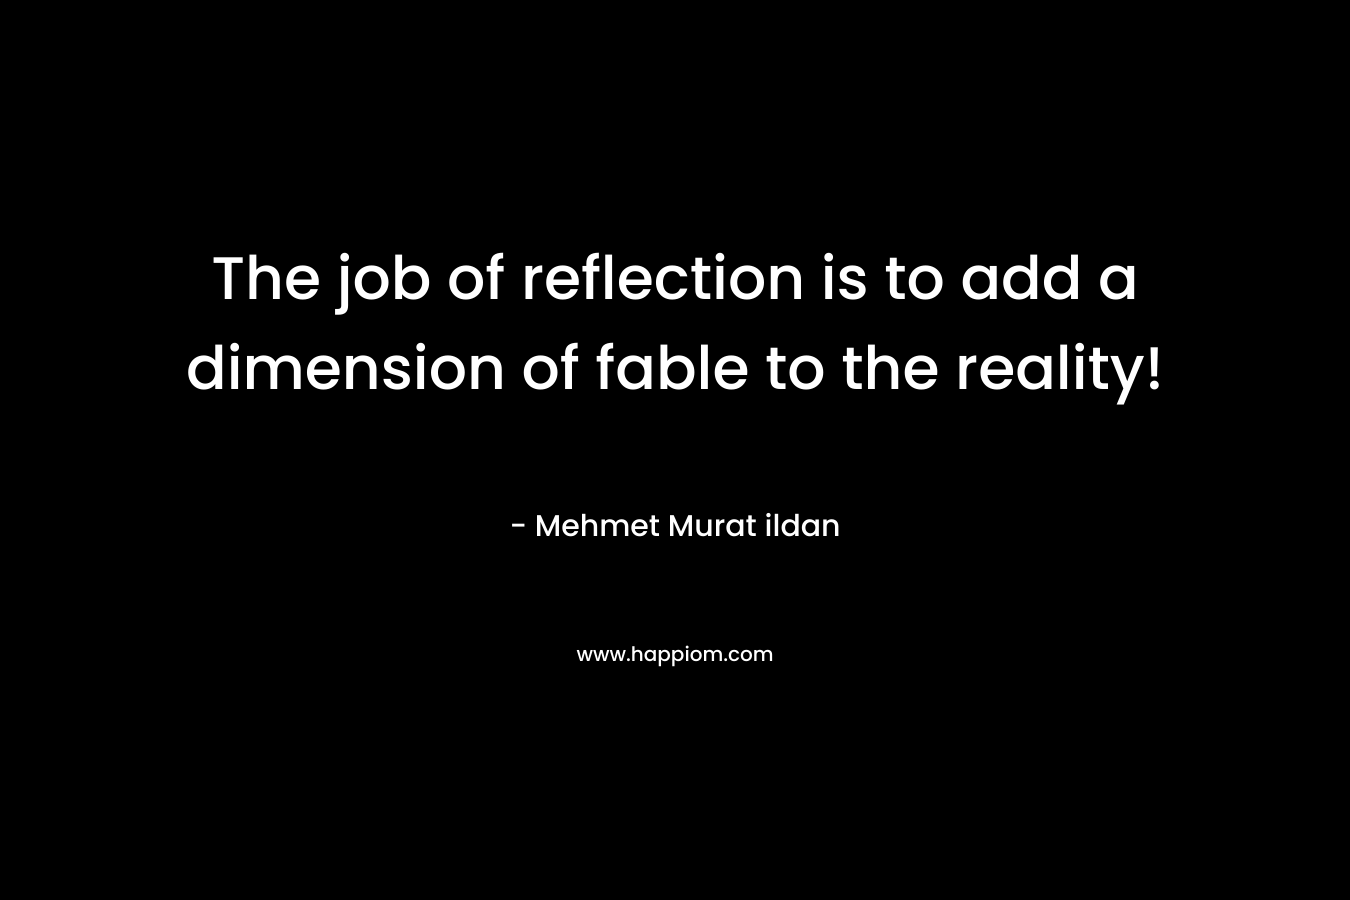 The job of reflection is to add a dimension of fable to the reality!